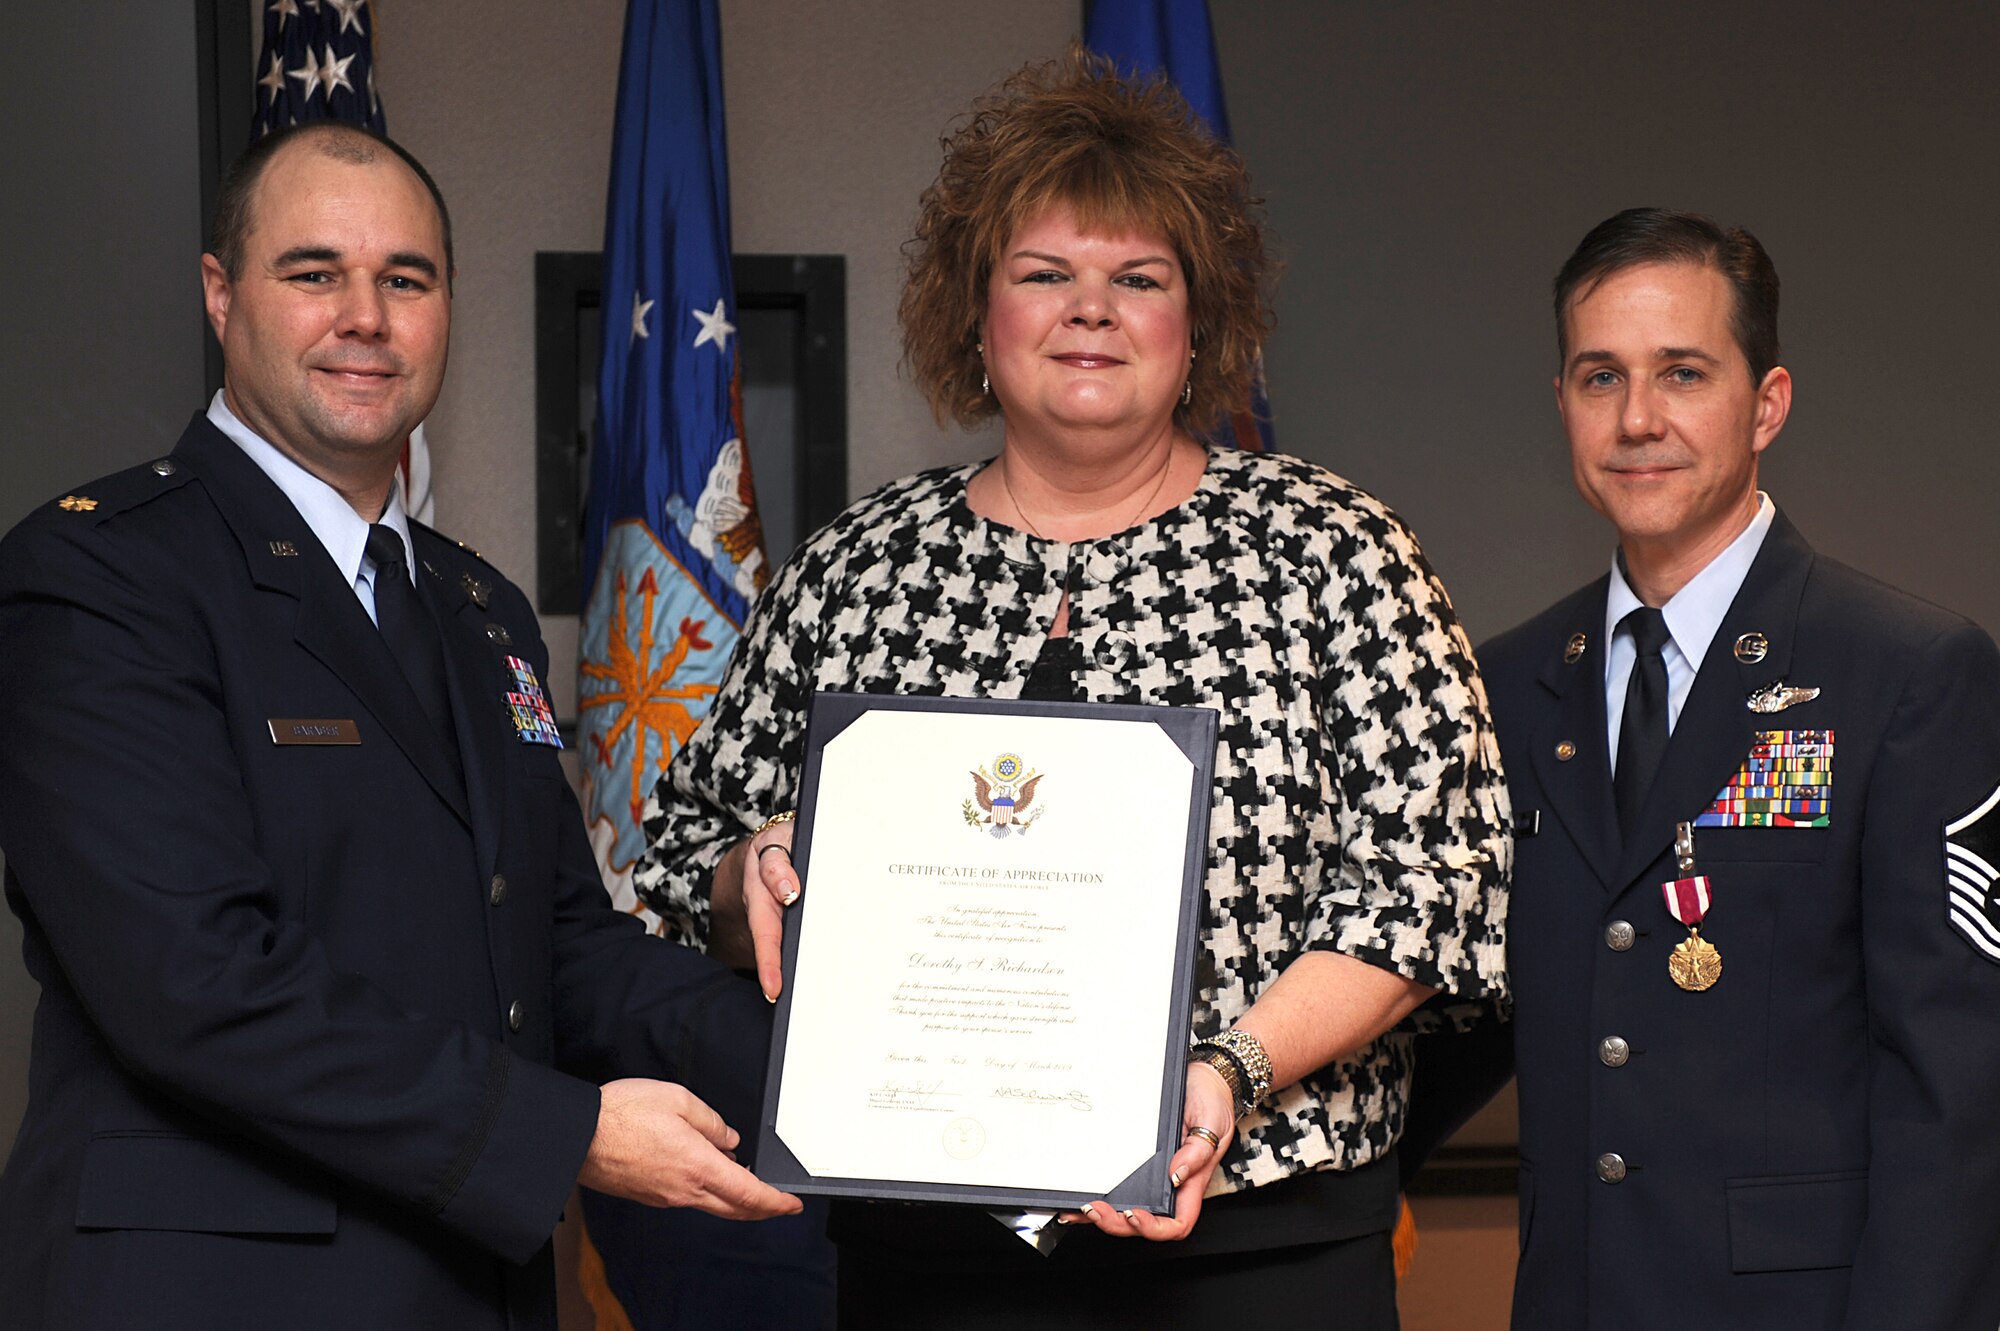 Maj. Robert Barager, Expeditionary Operations School, presents a certificate of appreciation to Dorothy, wife of Master Sgt. Peter Richardson, during Sergeant Richardson's retirement ceremony in the U.S. Air Force Expeditionary Center on Fort Dix, N.J., Jan. 9, 2009.  Sergeant Richardson was a command tactician for the Combat Aircrew Tactics Studies Course.  He was then selected to fulfill the position of Course Director for the CATS Course in his last years at the Expeditionary Center. (U.S. Air Force Photo/Staff Sgt. Nathan Bevier)